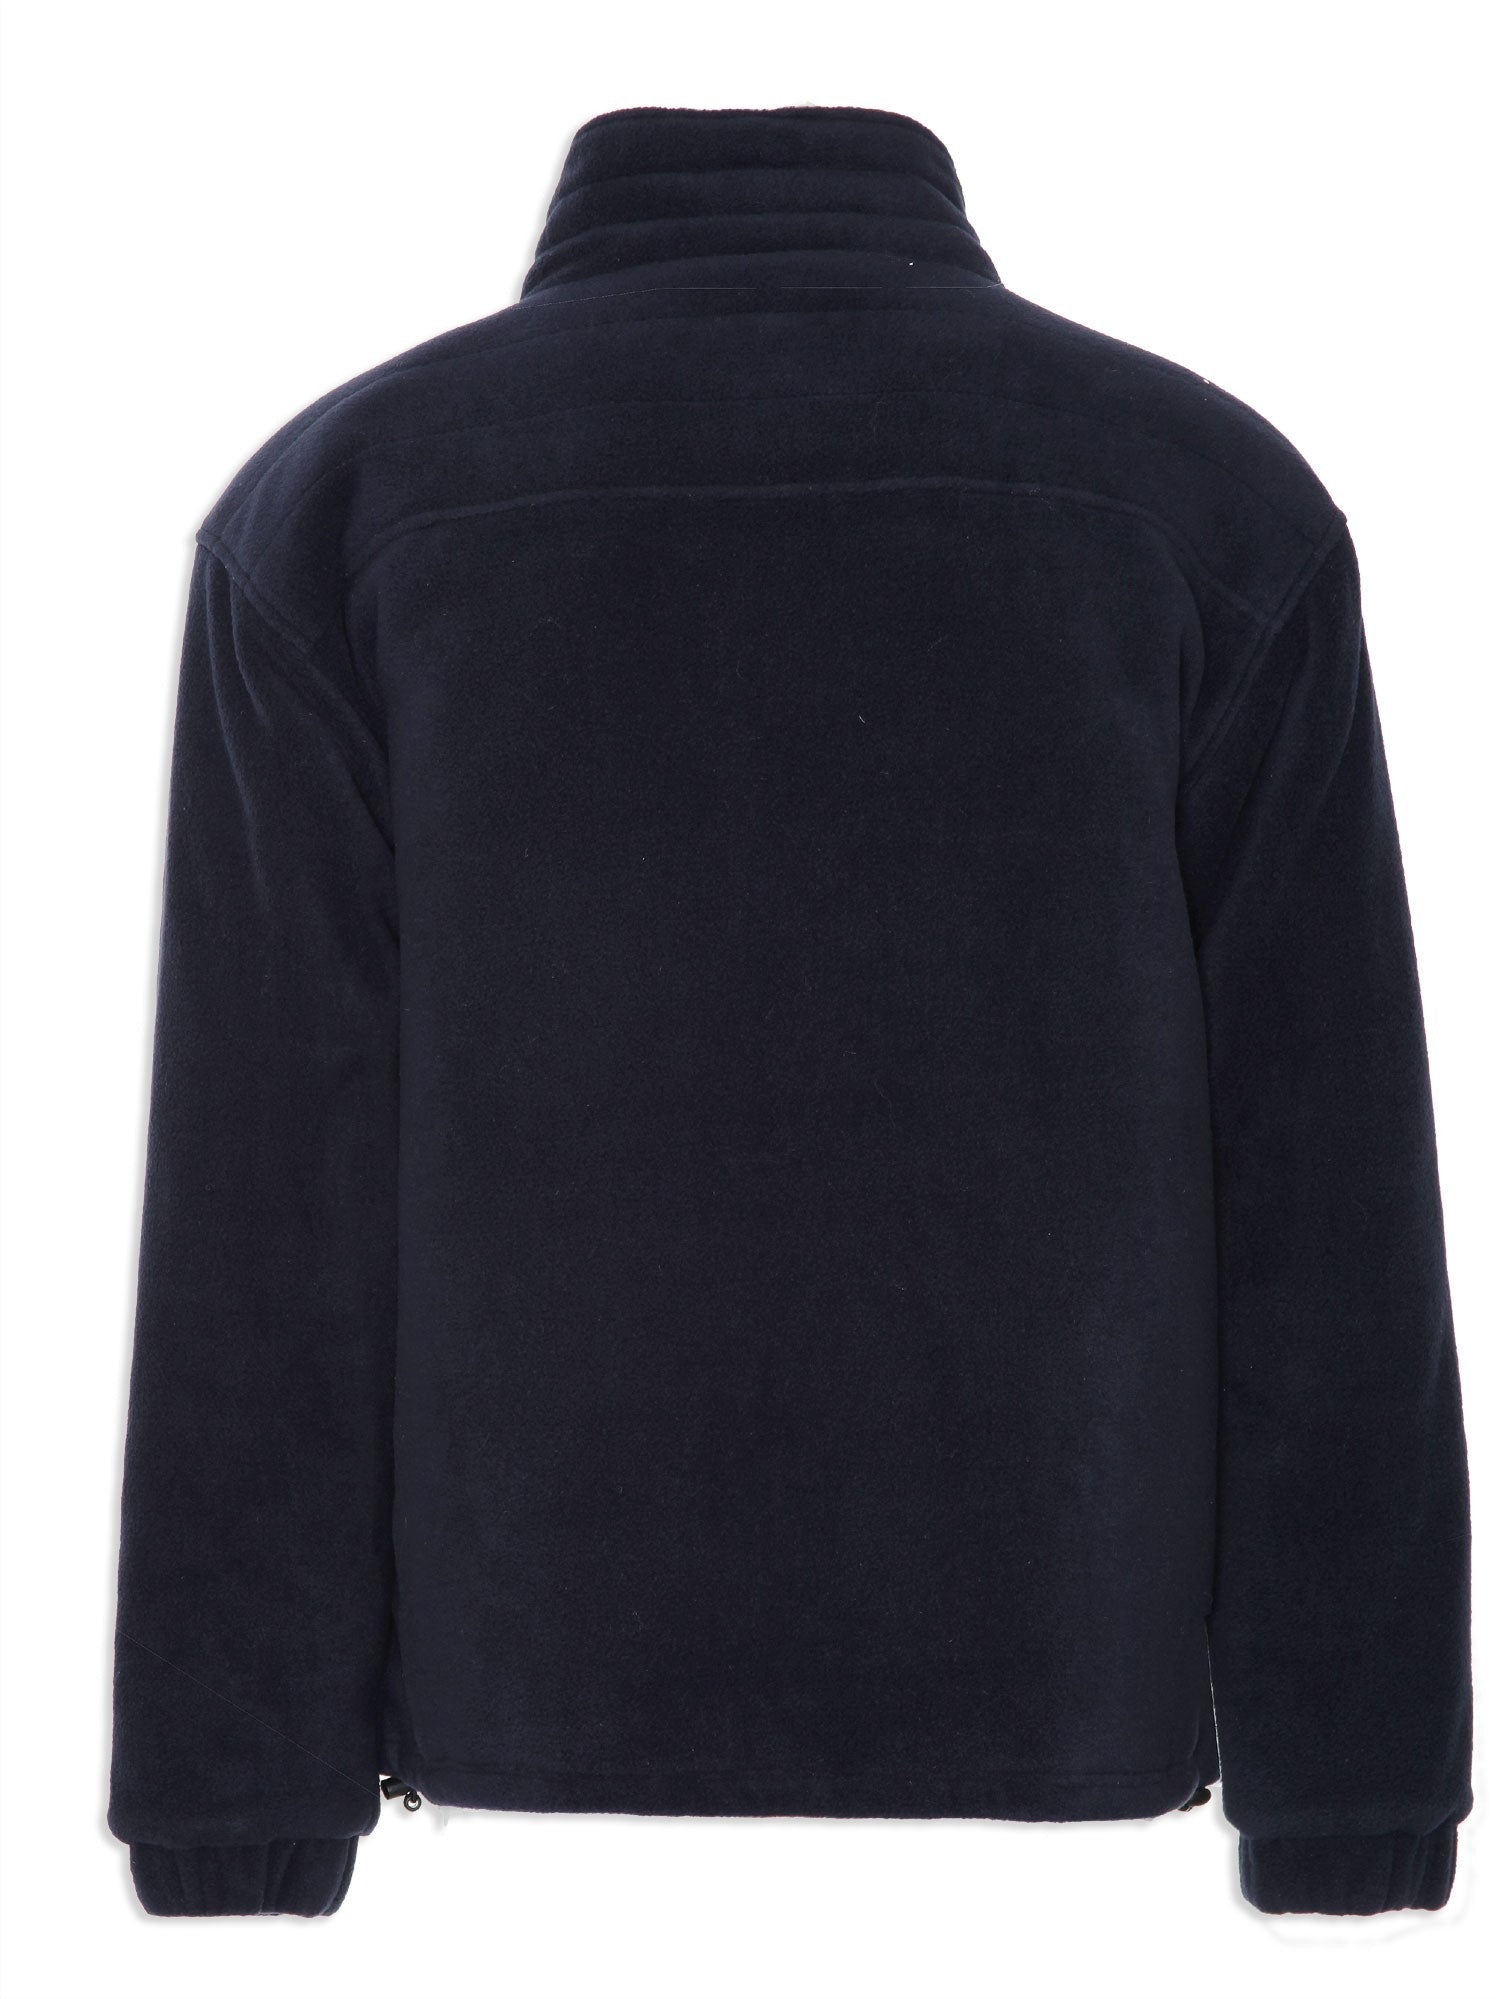 Back view Glen Lined Fleece Jacket from Champion in navy 